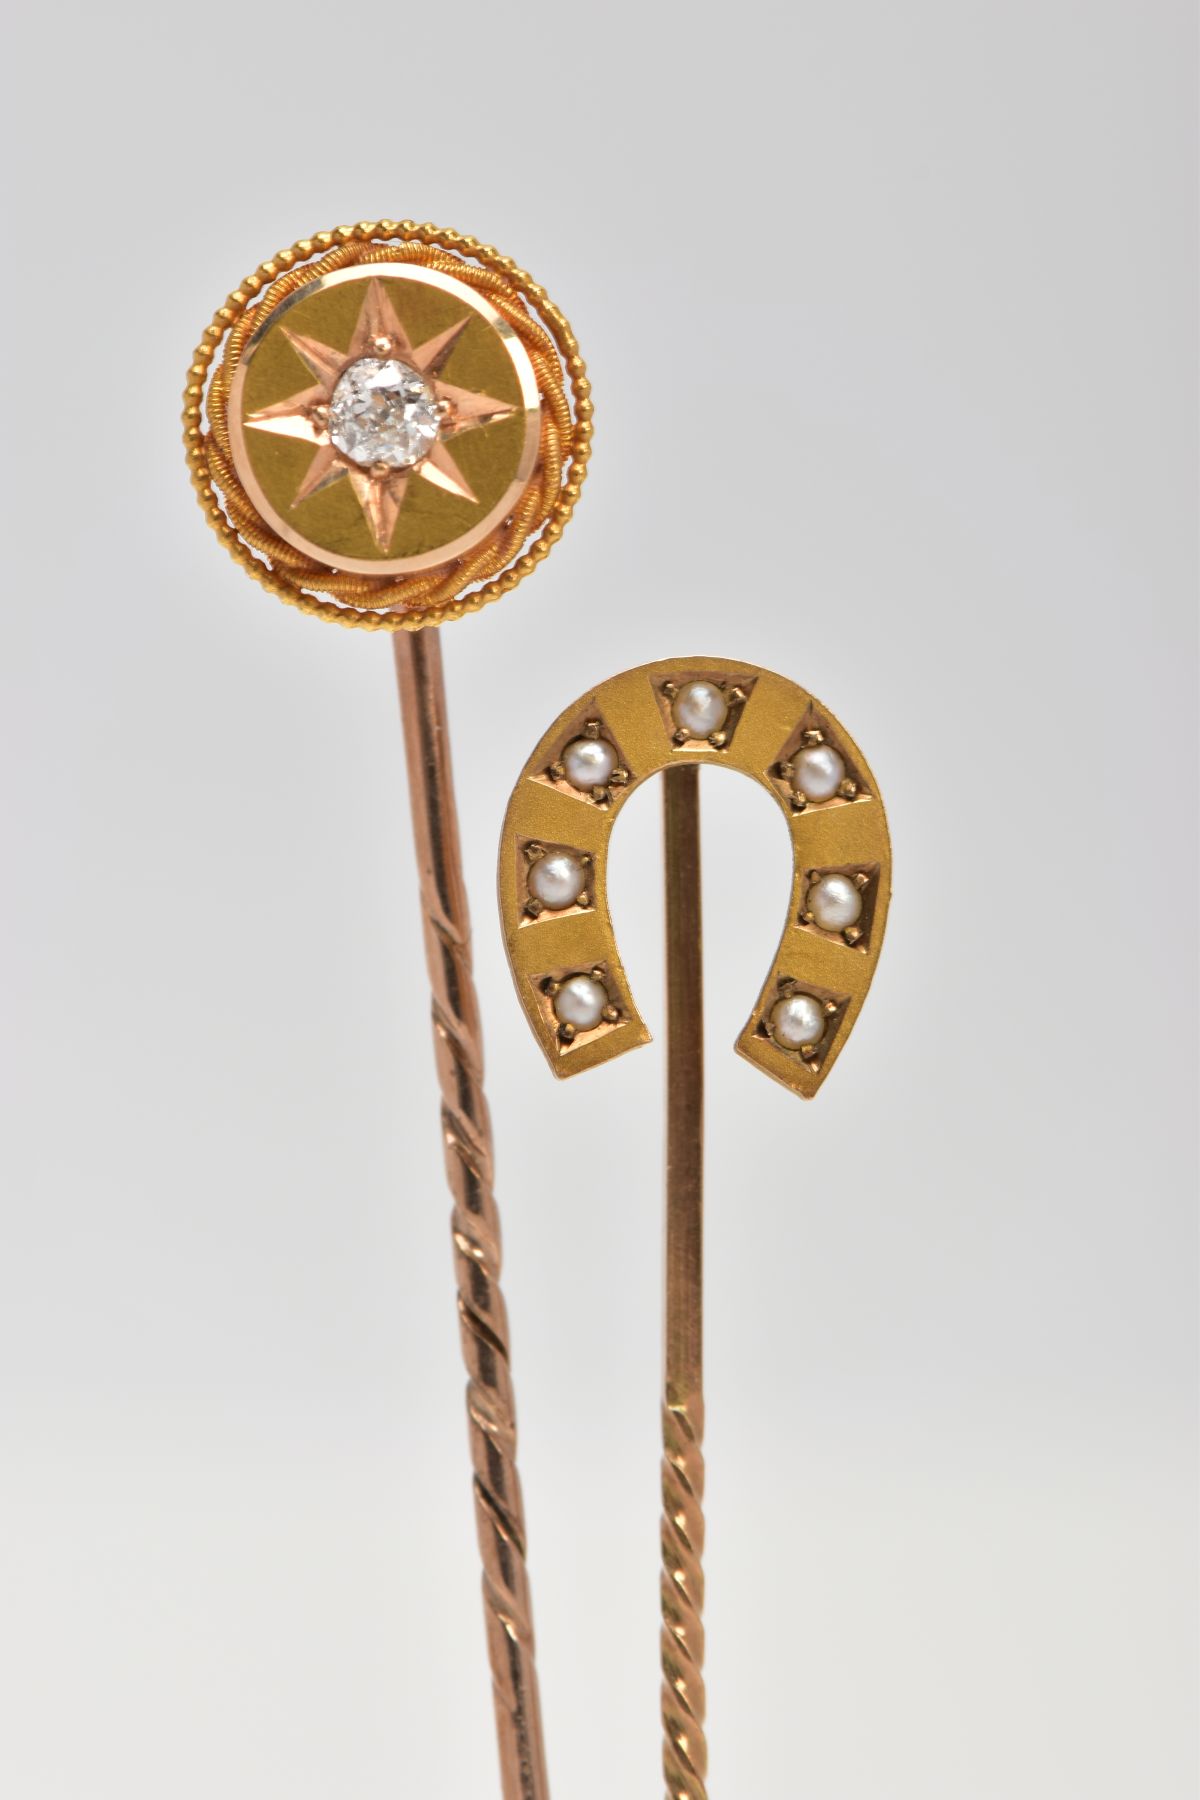 TWO GOLD STICK PINS, one stick pin featuring a horse shoe design set with seven seed pearls,